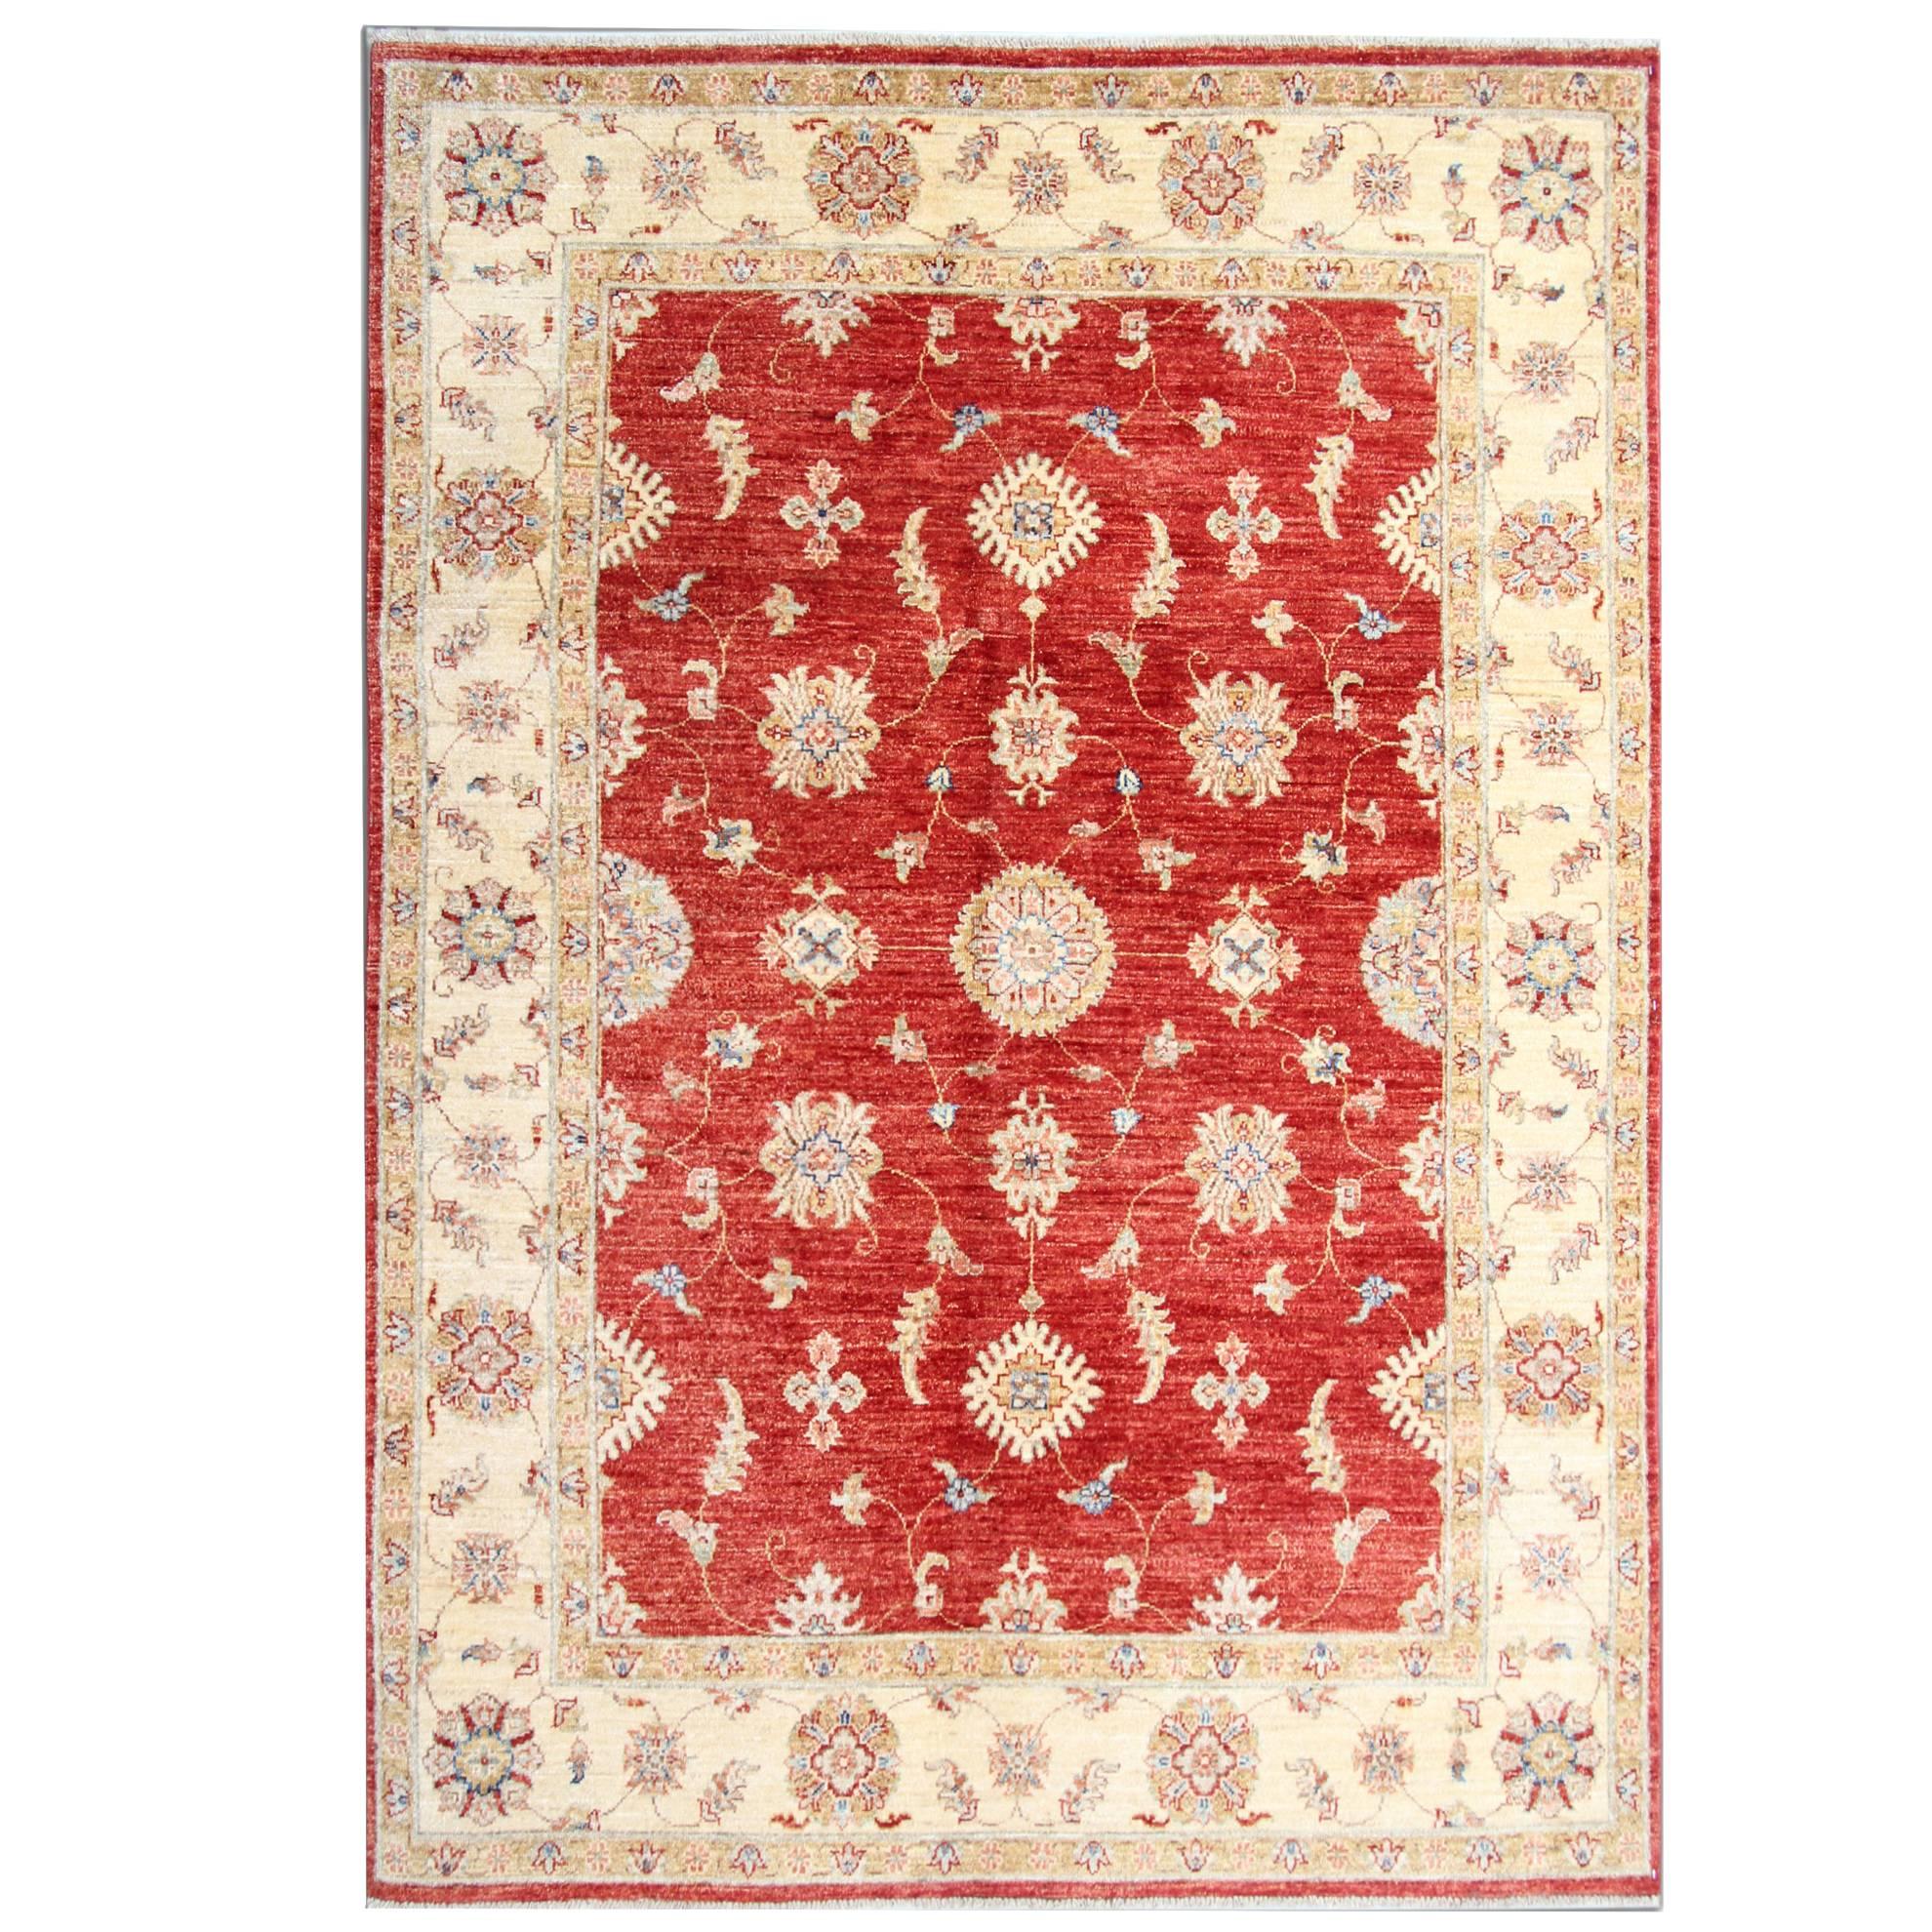 Red Hand Made Carpet Oriental Rugs, Floral Carpet for Sale For Sale